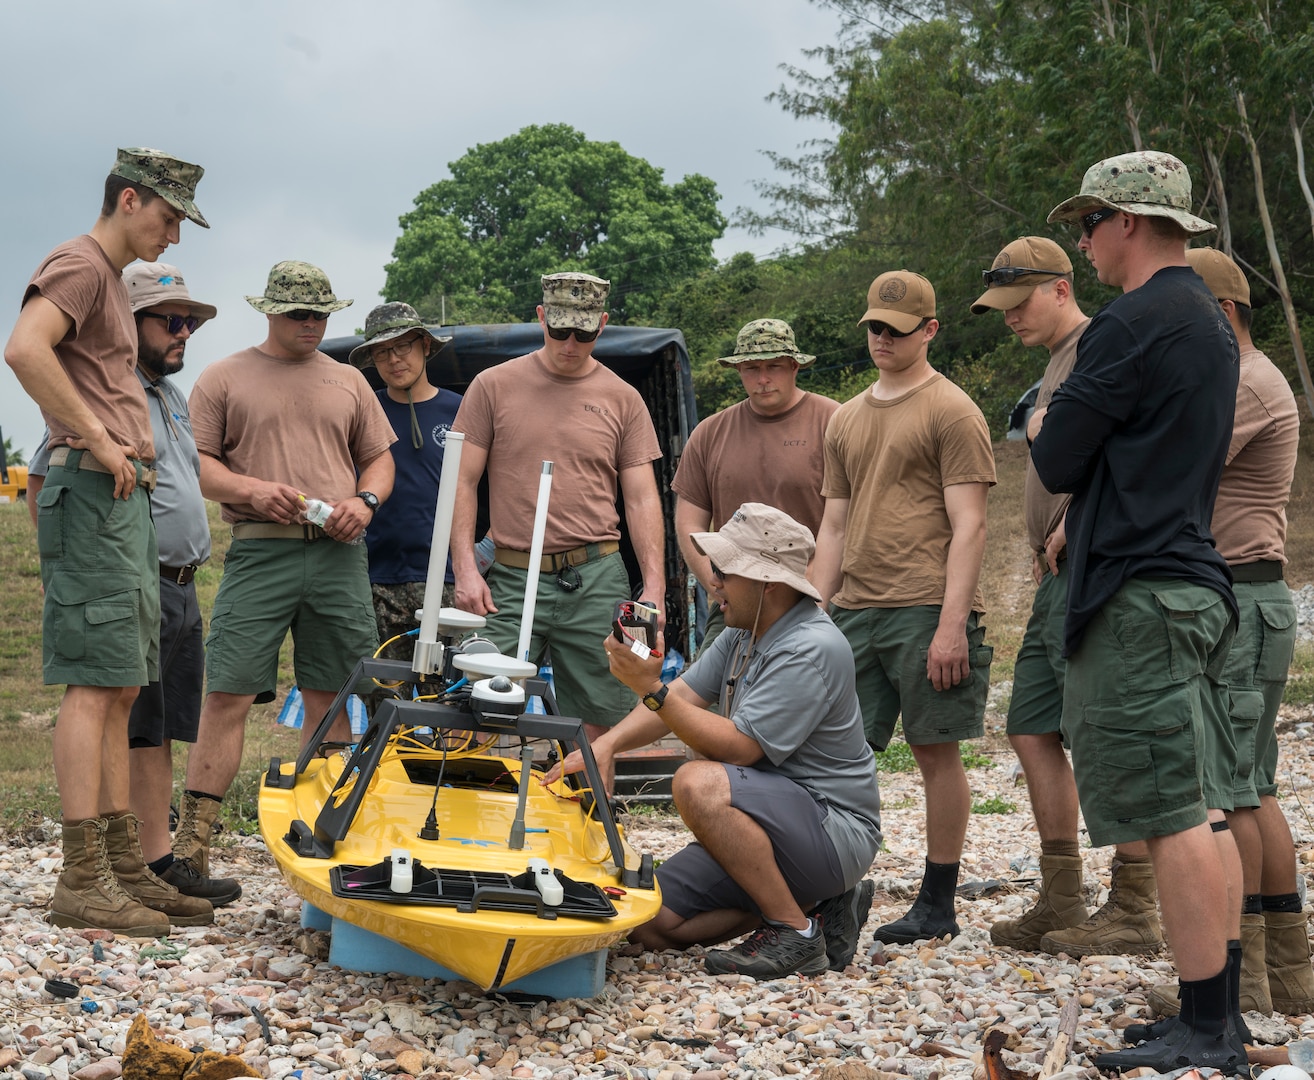 Vitad Pradith, a technical expert for Teledyne Marine, shows U.S. Navy Sailors assigned to Underwater Construction Team 2 and Republic of Korea UCT how to properly operate a Teledyne Oceanscience Z-Boat 1800 during a hydrographic survey in Sattahip, Thailand for Exercise Cobra Gold Feb. 19, 2018. Cobra Gold 18 provides a venue for the United States, allied and partner nations to advance interoperability and increase partner capacity in planning and executing complex and realistic multinational force and combined task force operations.